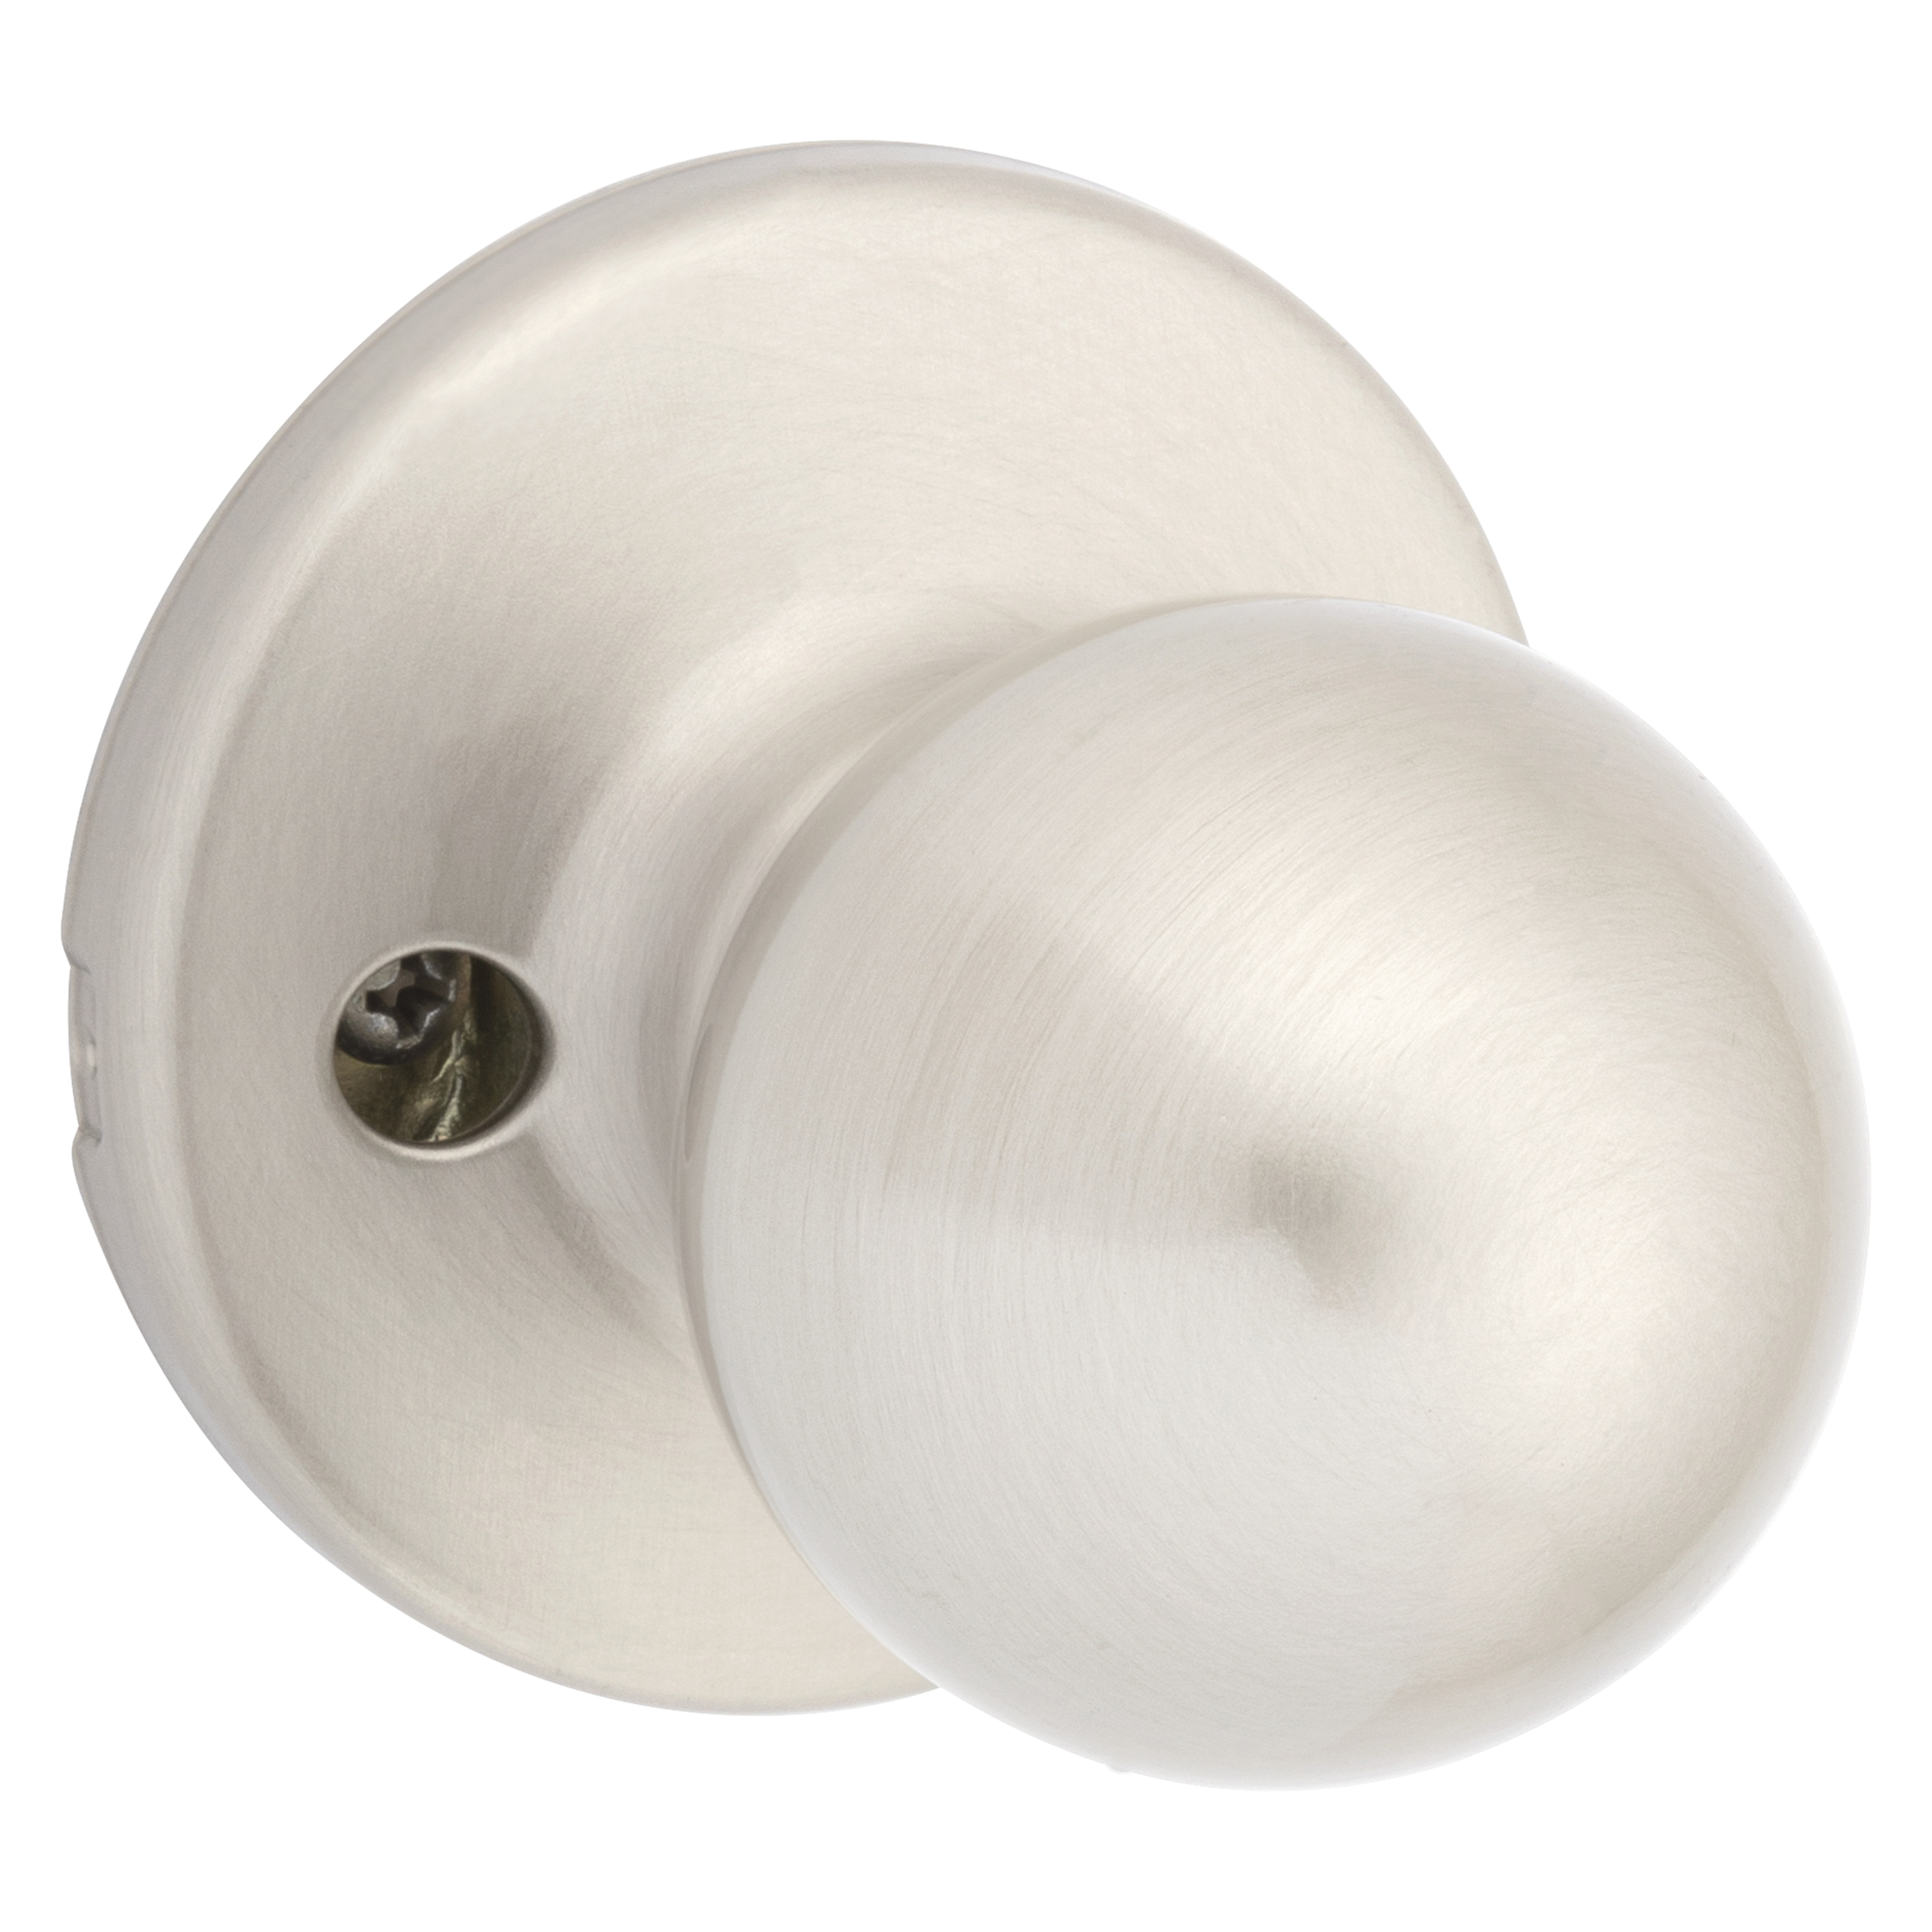 488P 15 V1 Dummy Knob, Polo Design, Satin Nickel, Residential, 1-3/4 to 1-3/8 in Thick Door, Zinc